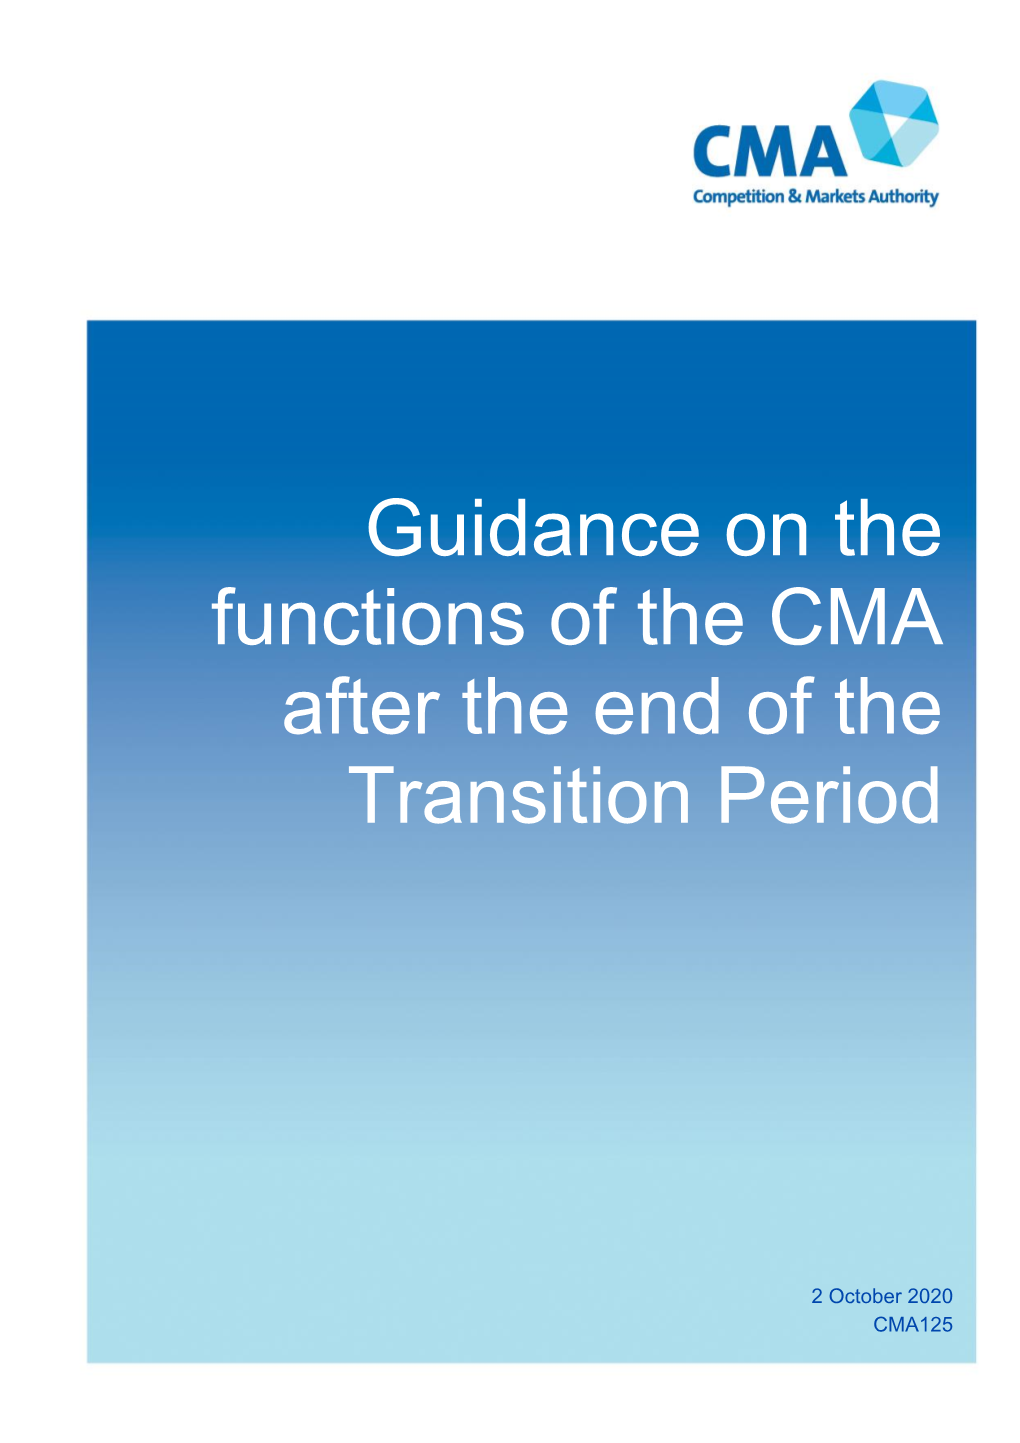 Guidance on the Functions of the CMA After the End of the Transition Period